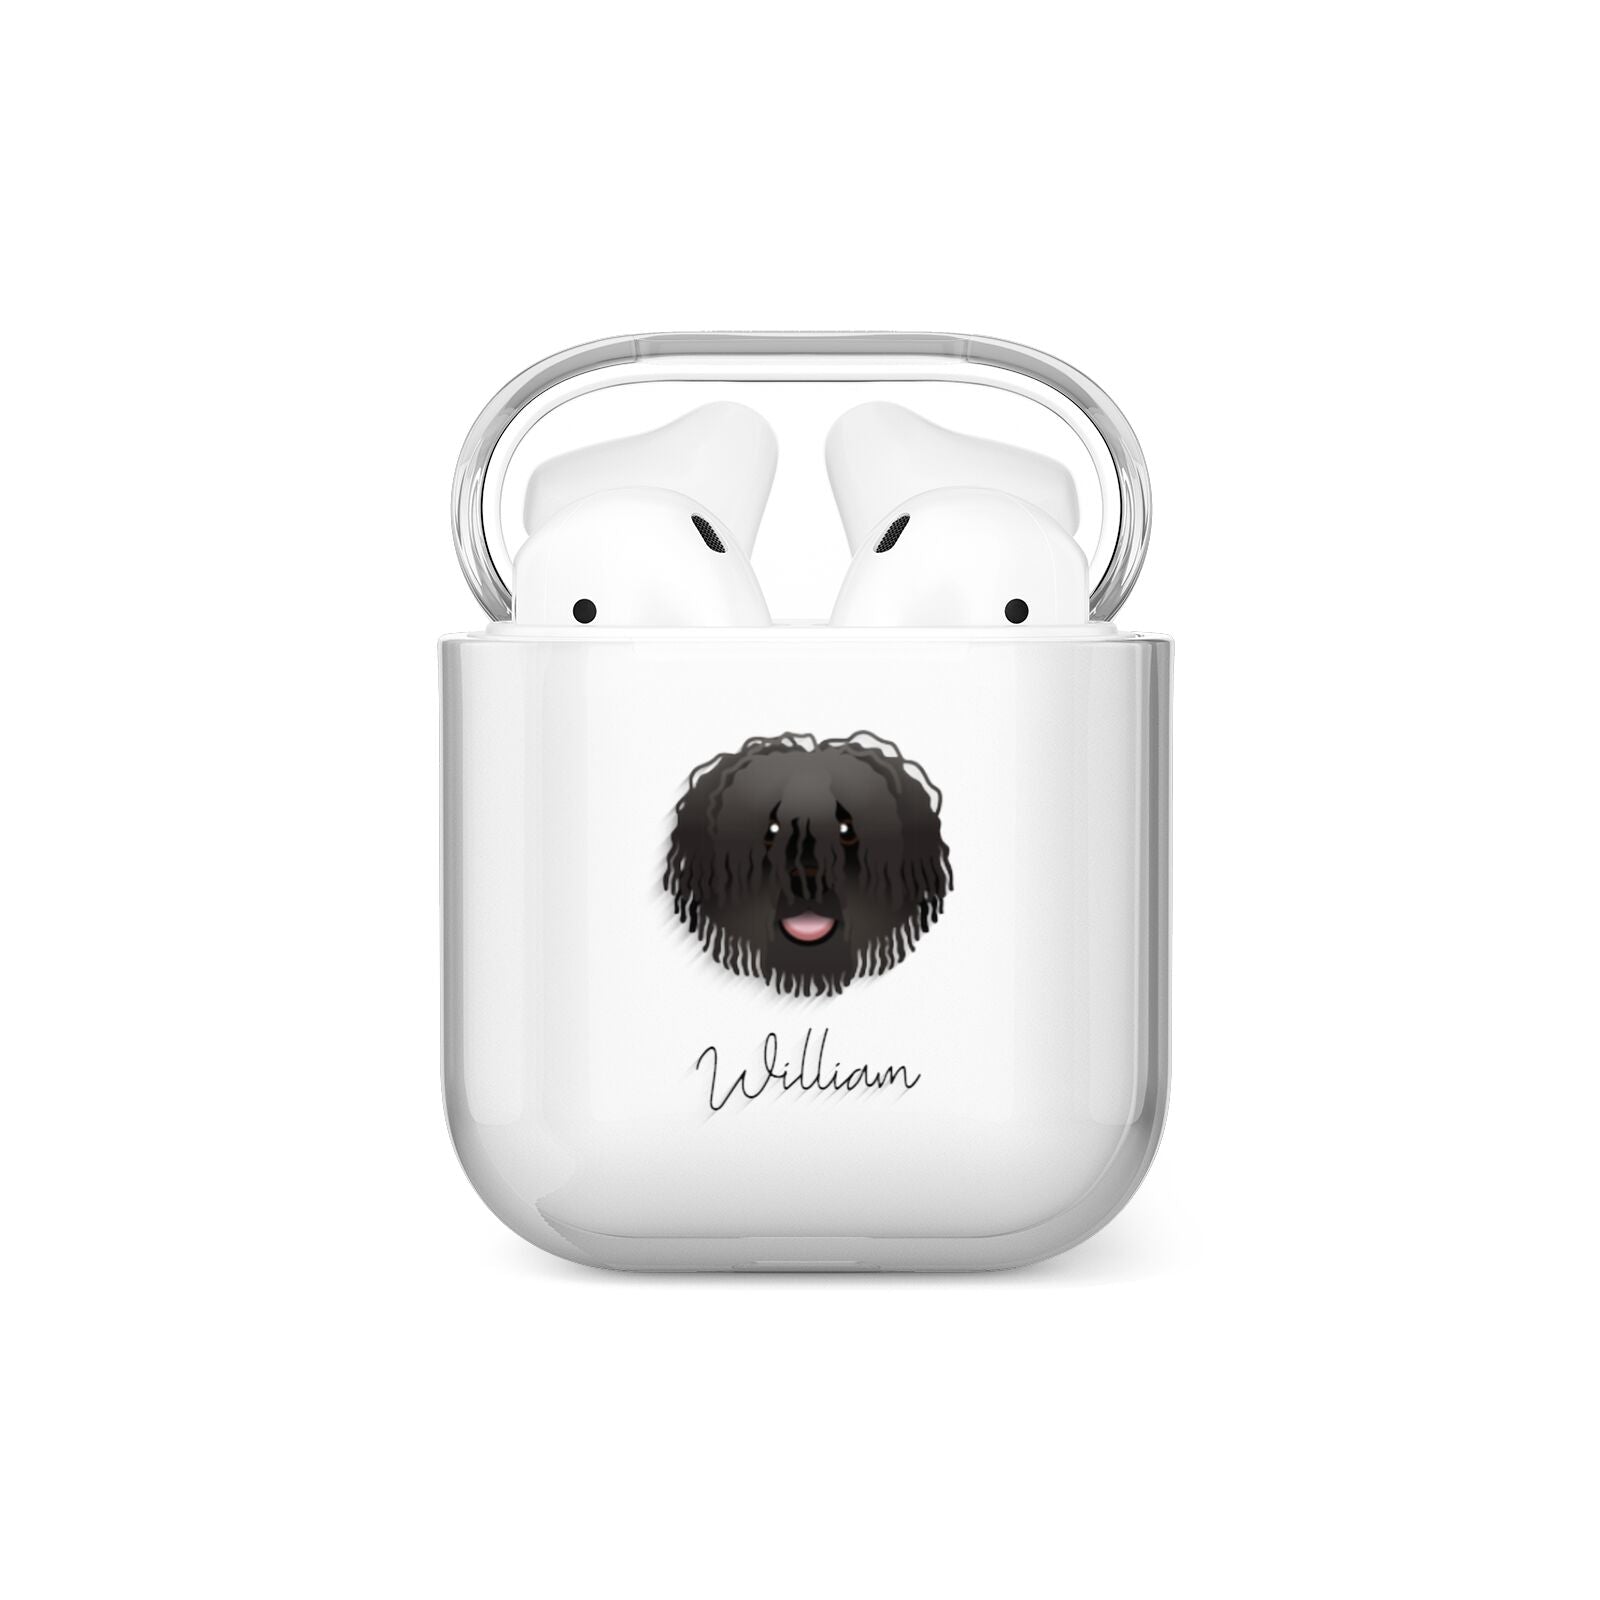 Hungarian Puli Personalised AirPods Case